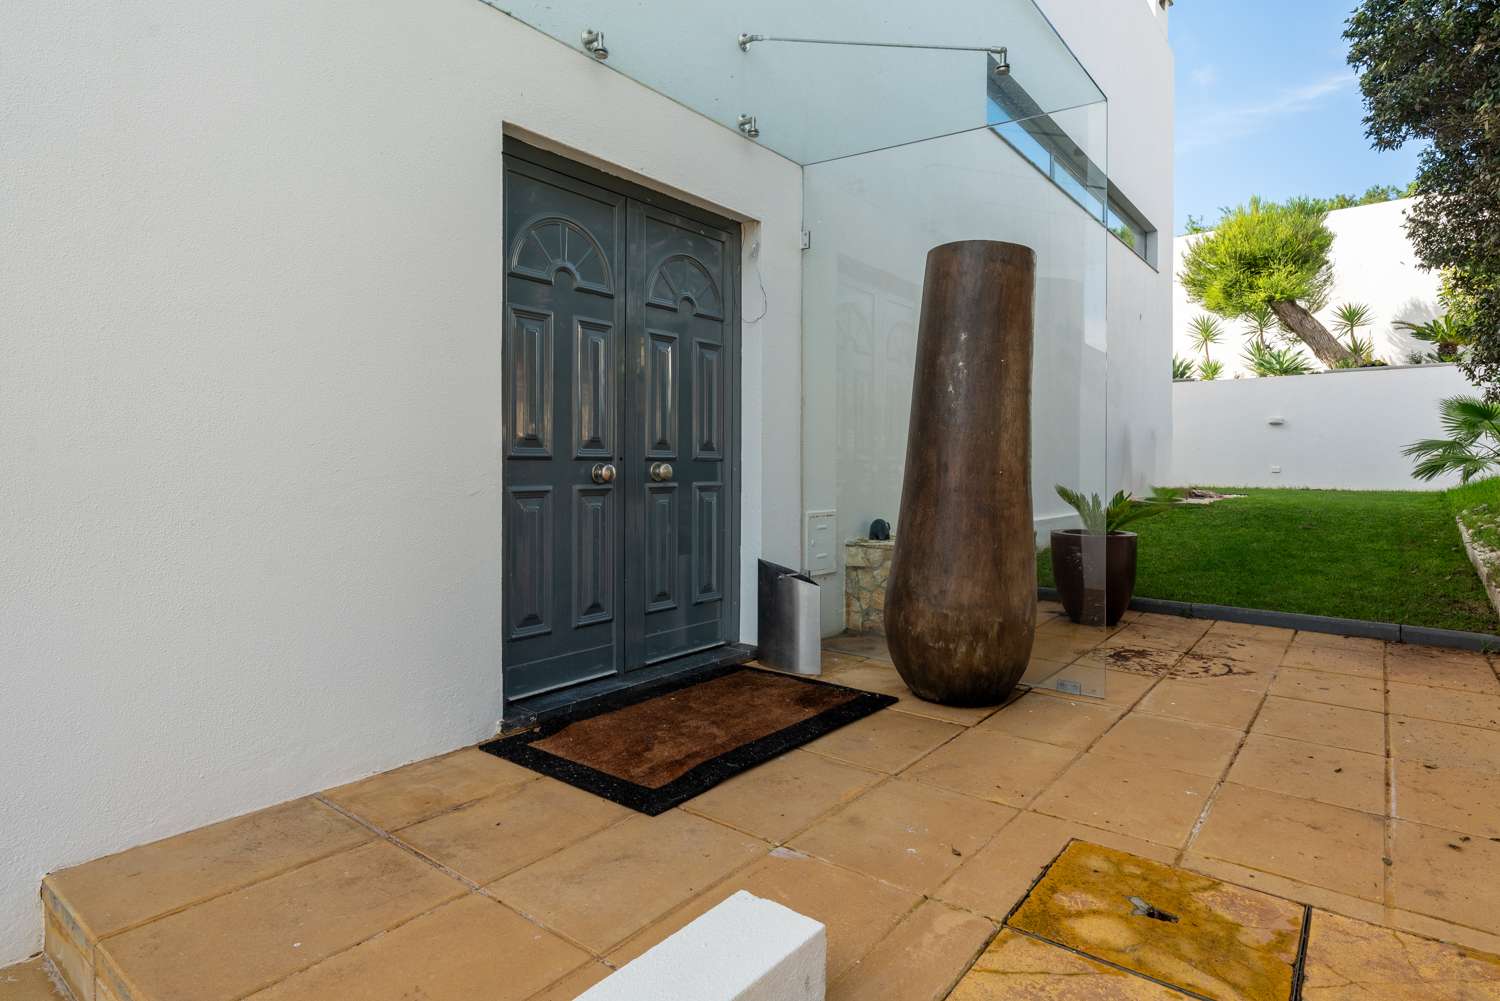 4 bedroom villa with garden and pool for rent in Quinta da Moura